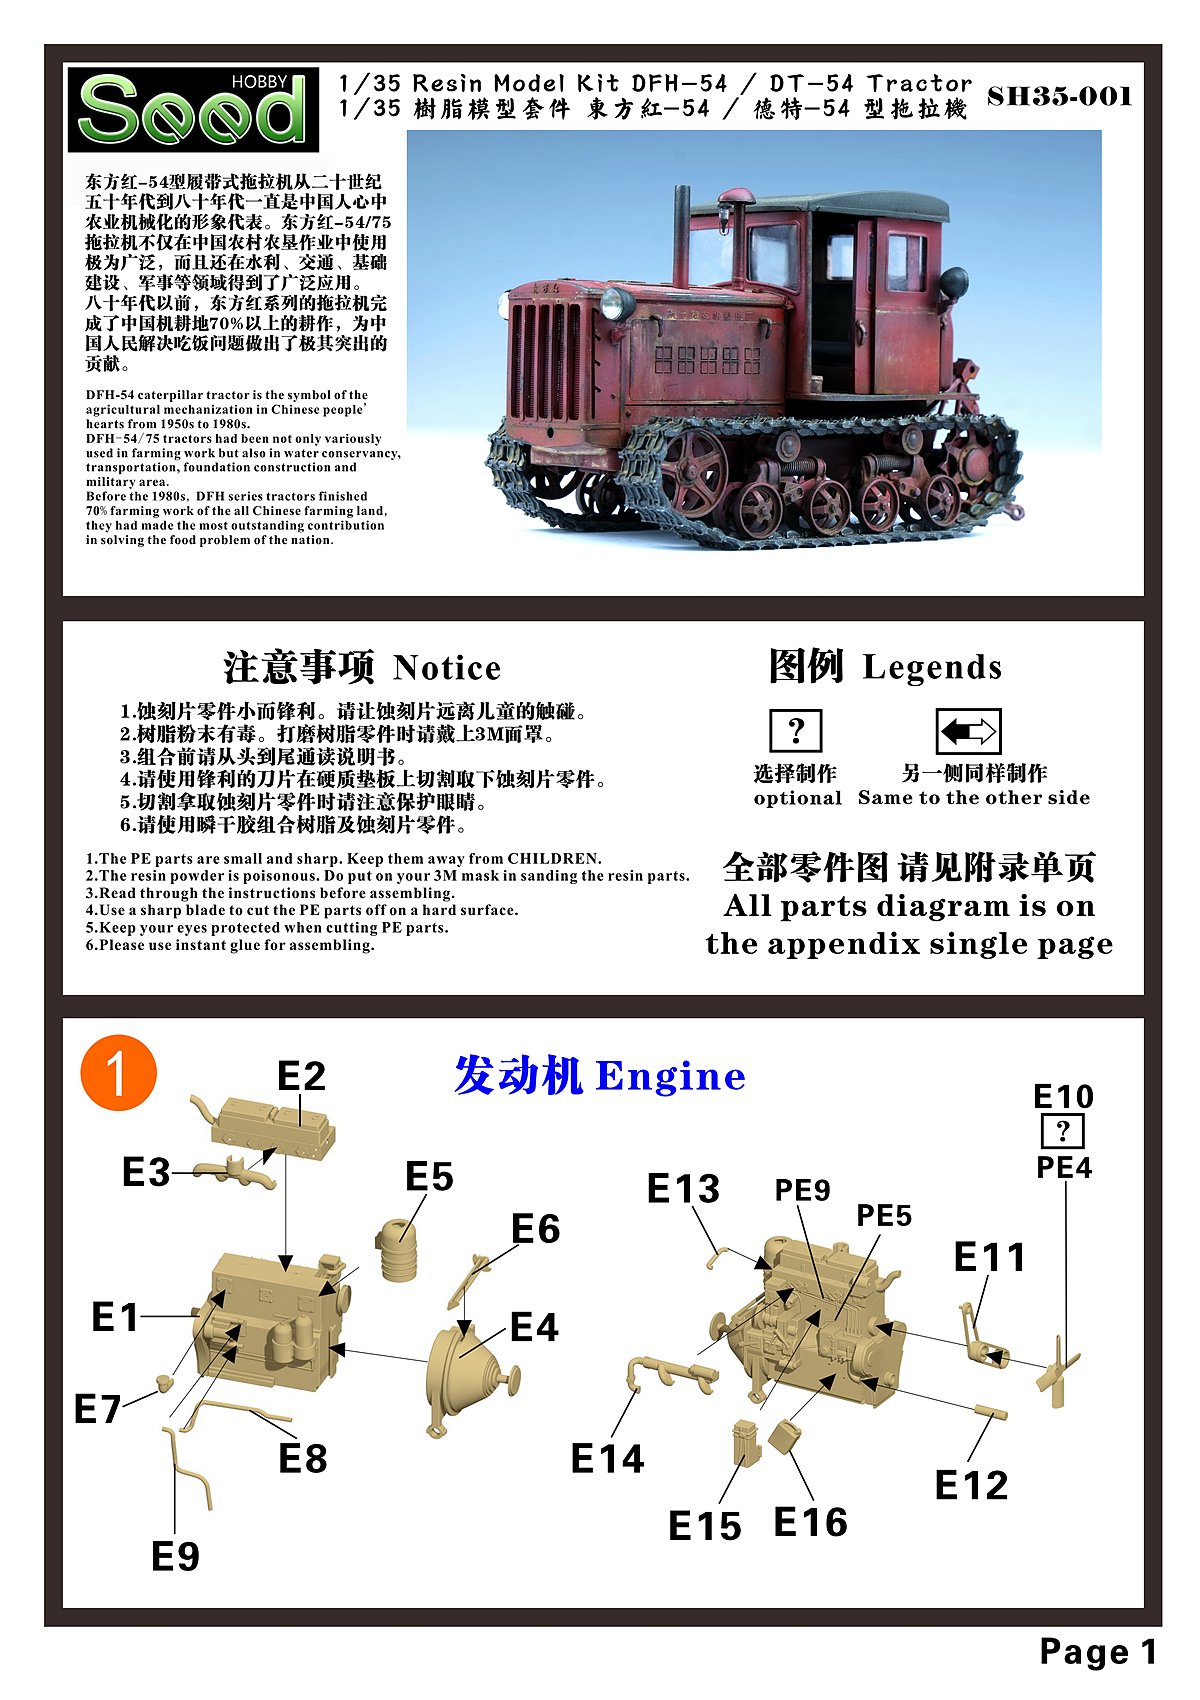 1/35 DFH-54 (DT-54) Tractor Resin Kit - Click Image to Close